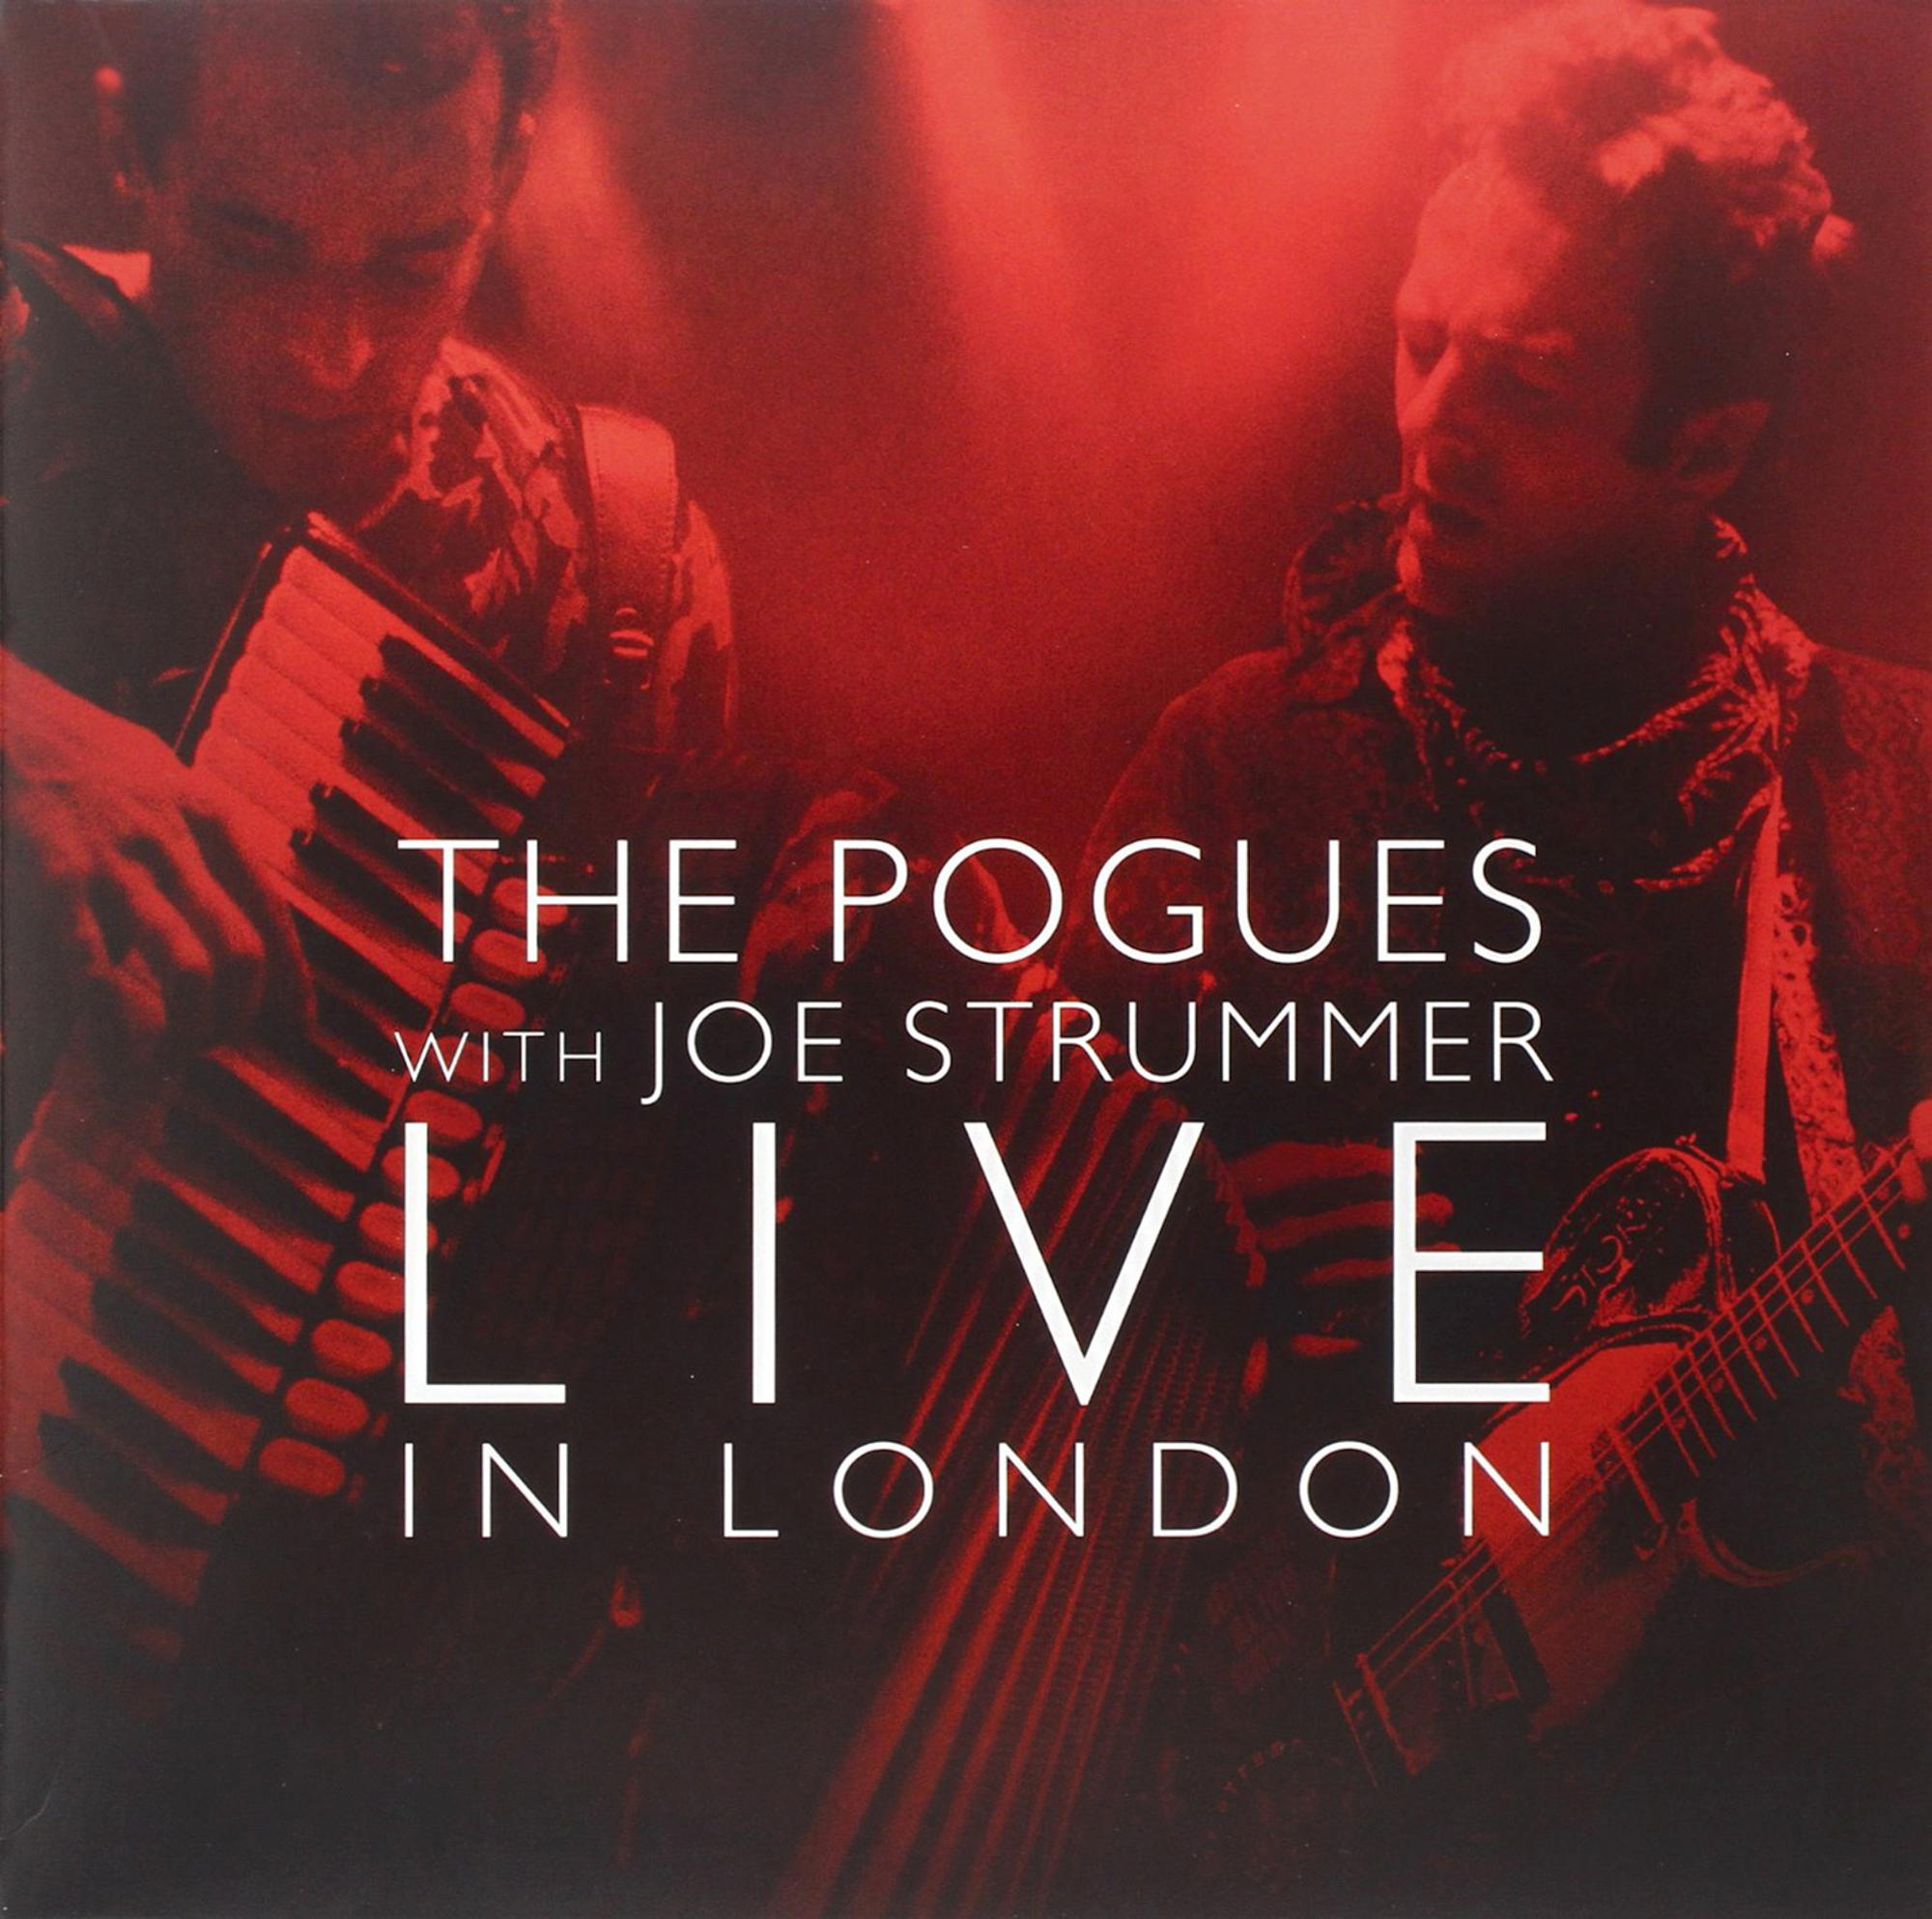 The Pogues London Pogues In Strummer Joe Live (Vinyl) - - The 1991 With